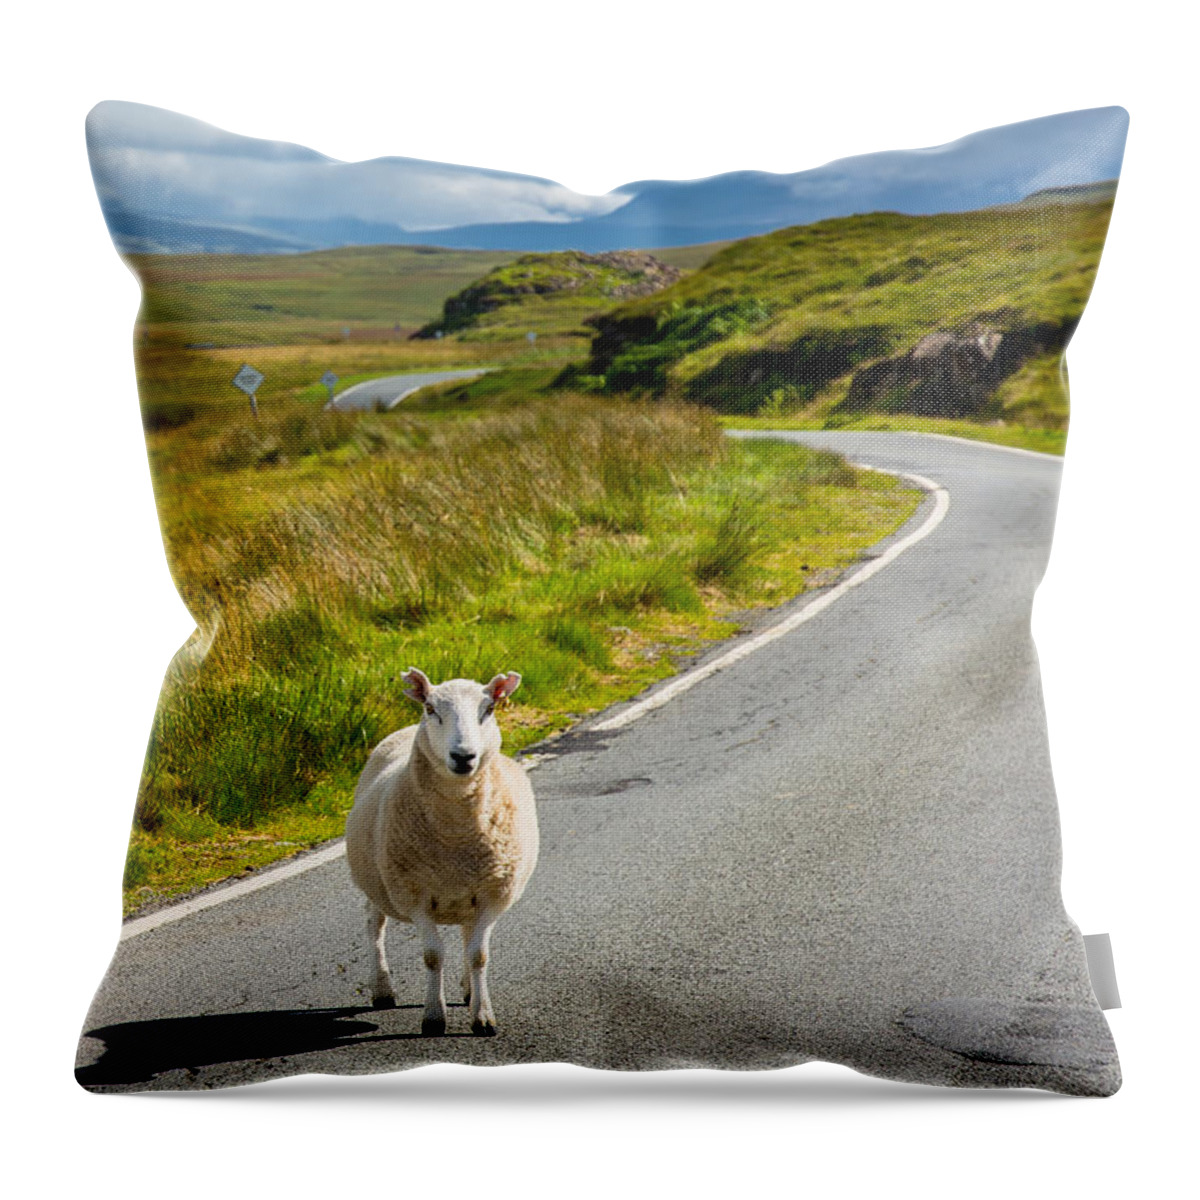 Scotland Throw Pillow featuring the photograph Curious Sheep On Scottish Road by Andreas Berthold